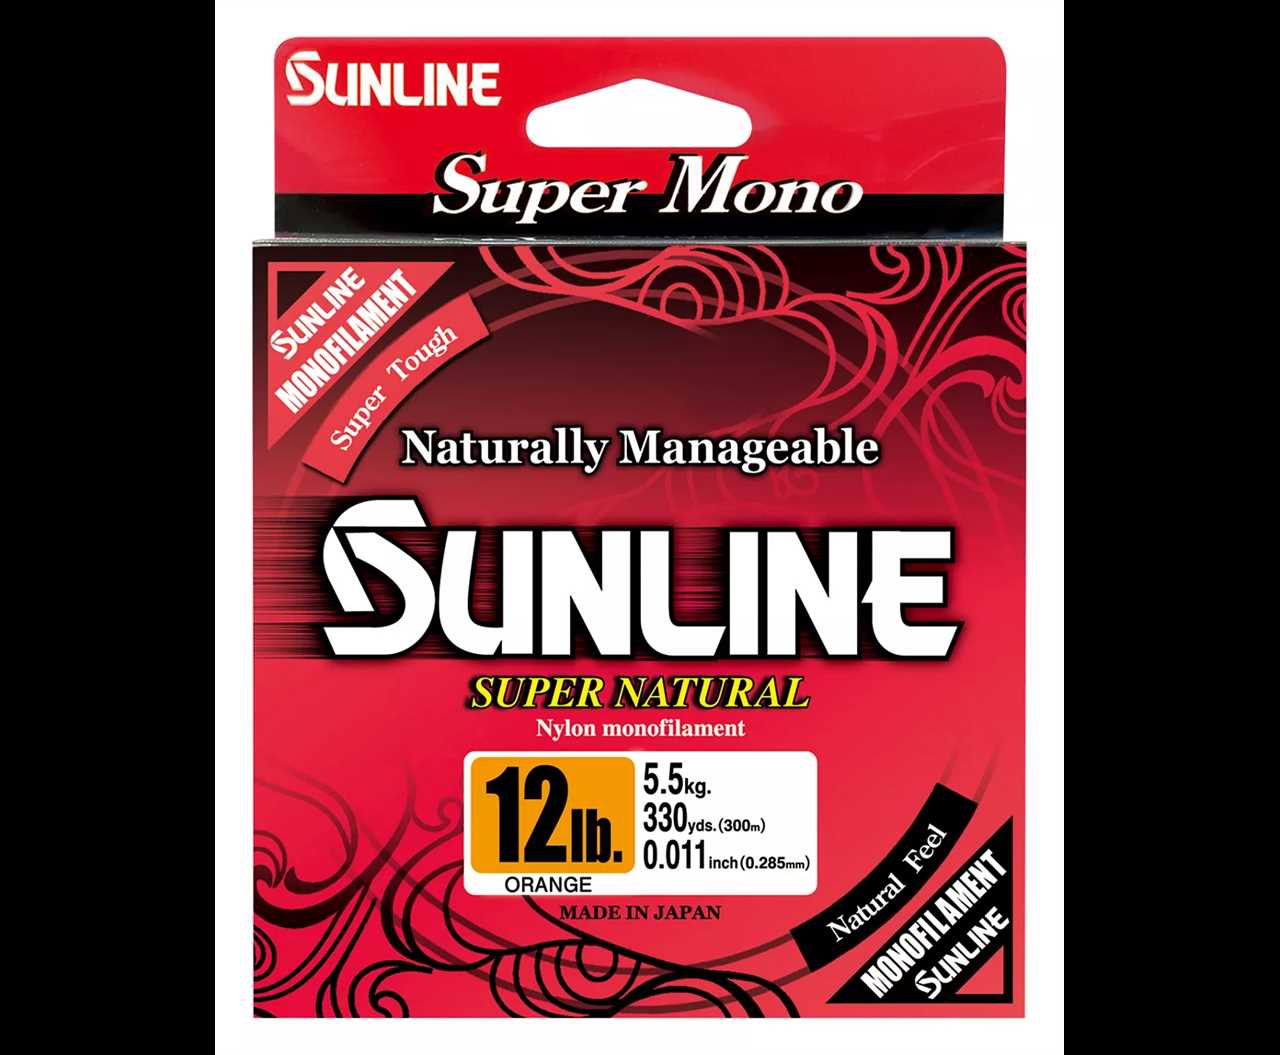 Sunline Super Natural is the best monofilament fishing line.